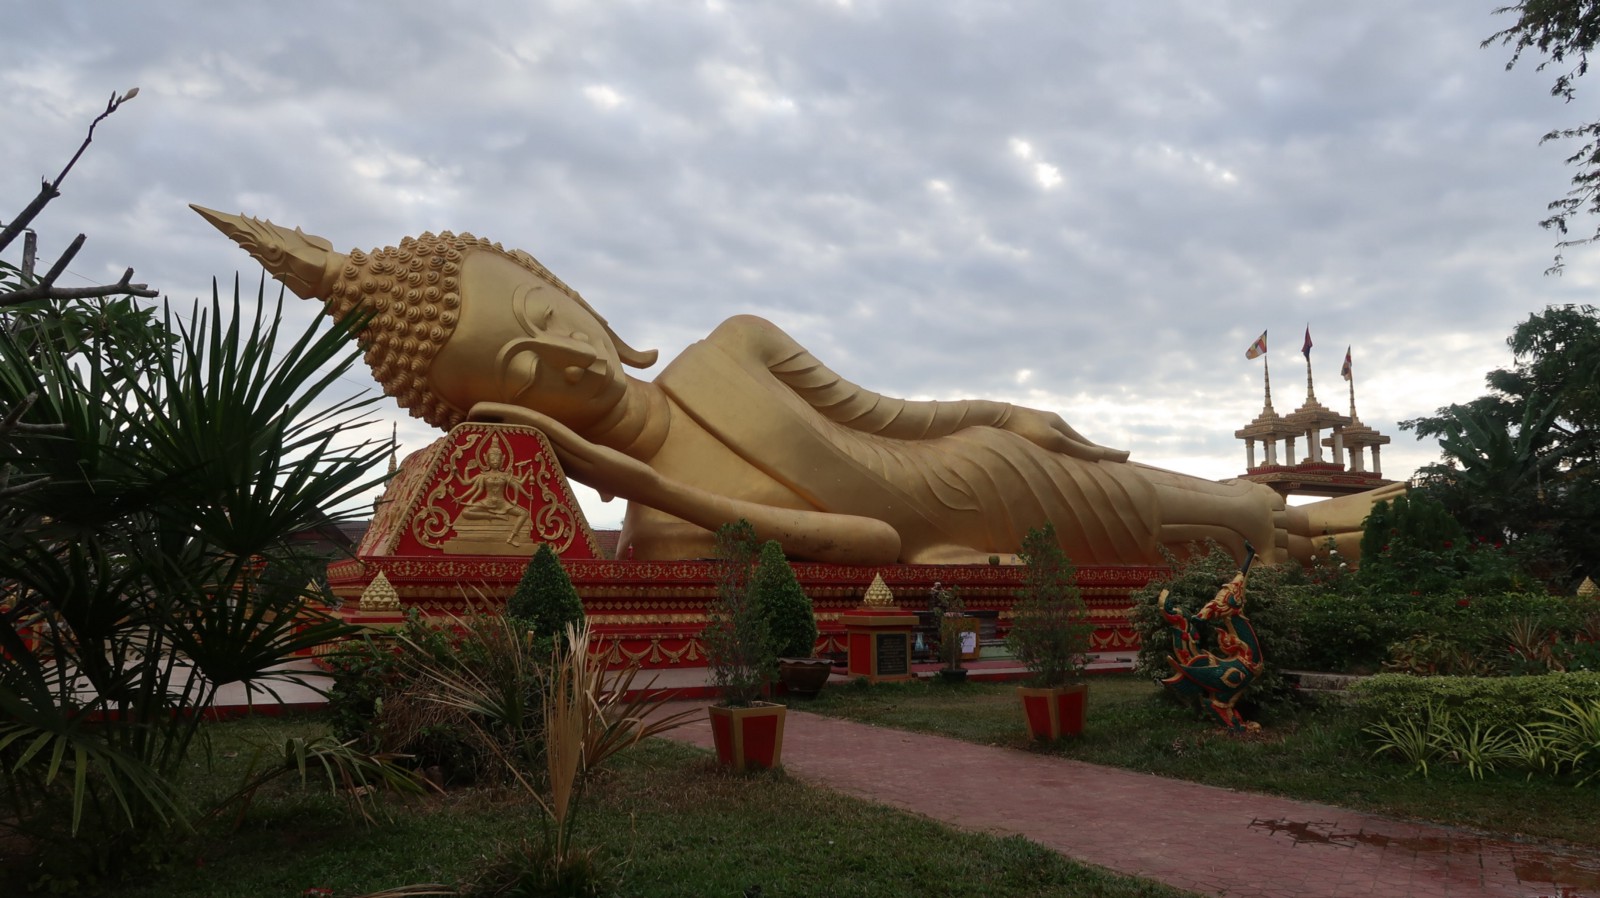 The reclining Buddha in Vientiane is quite the beauty